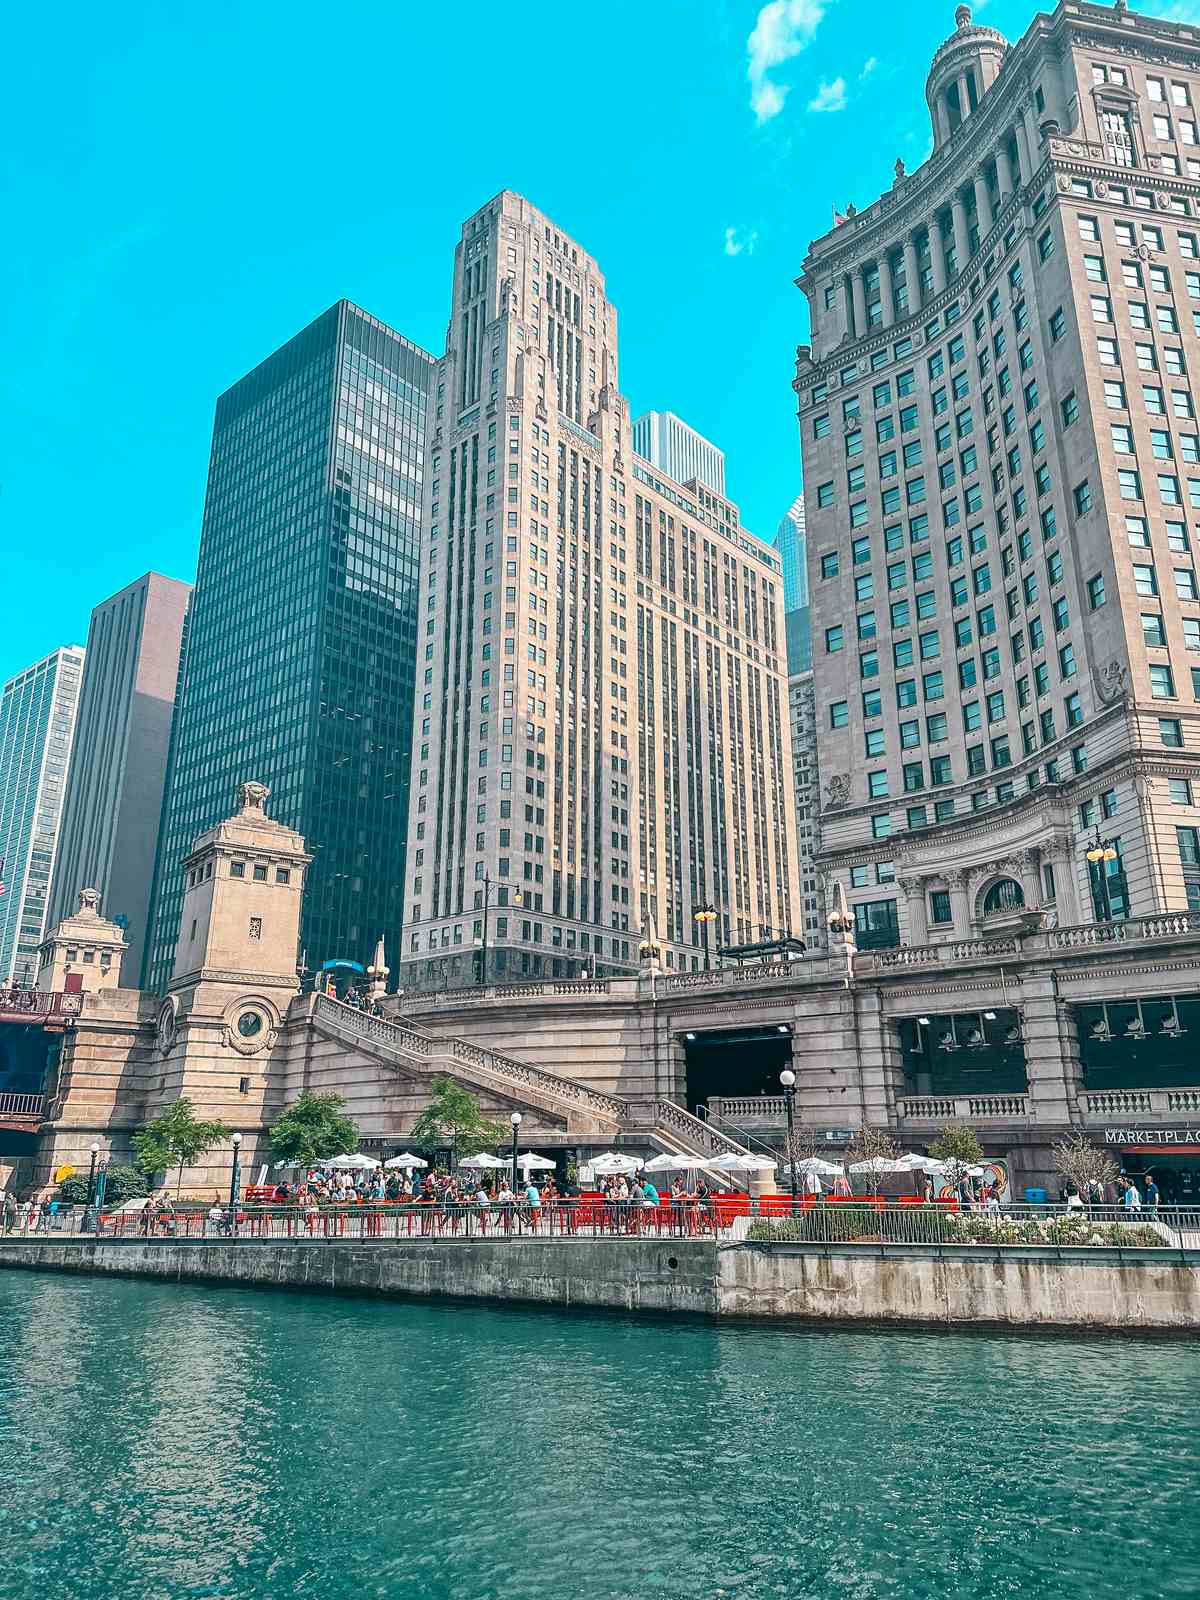 View of the Chicago Riverwalk from boat tour